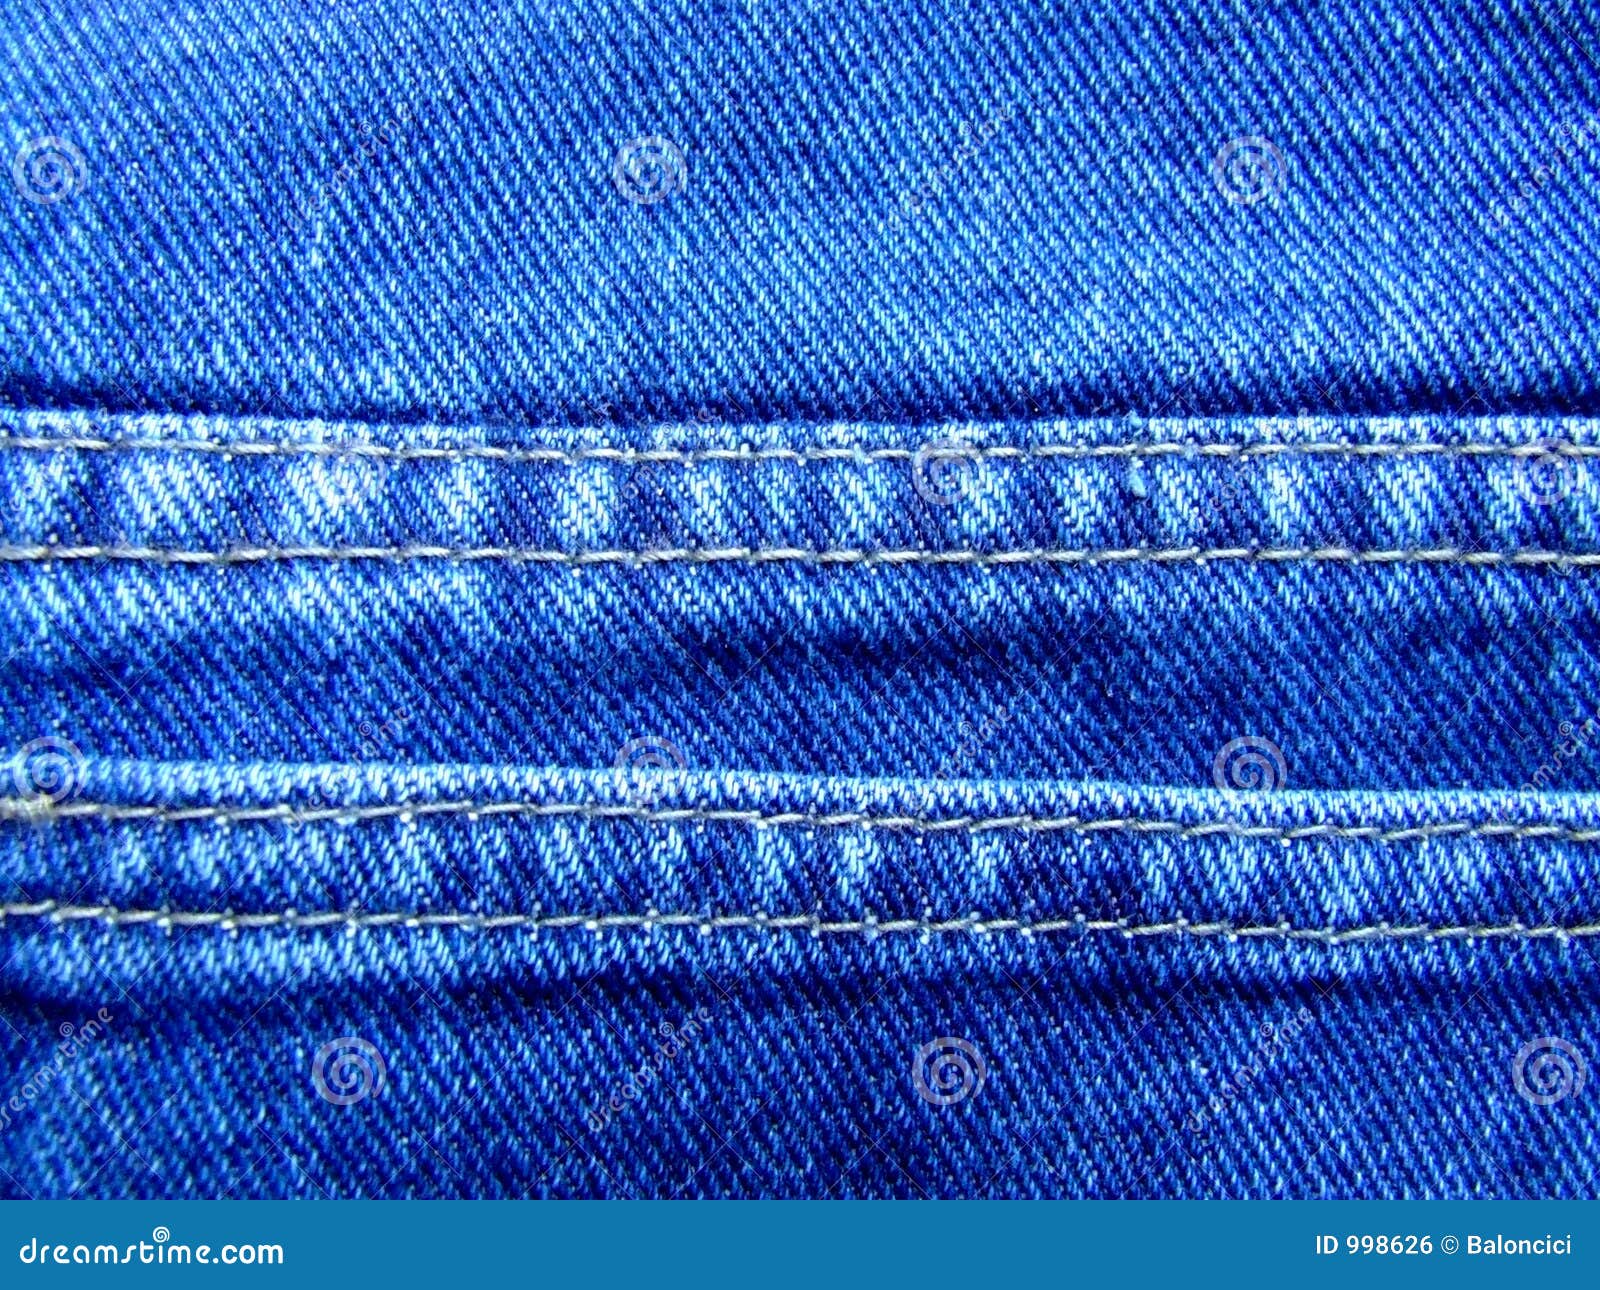 Jeans double stitch stock photo. Image of yarn, cloth, woof - 998626